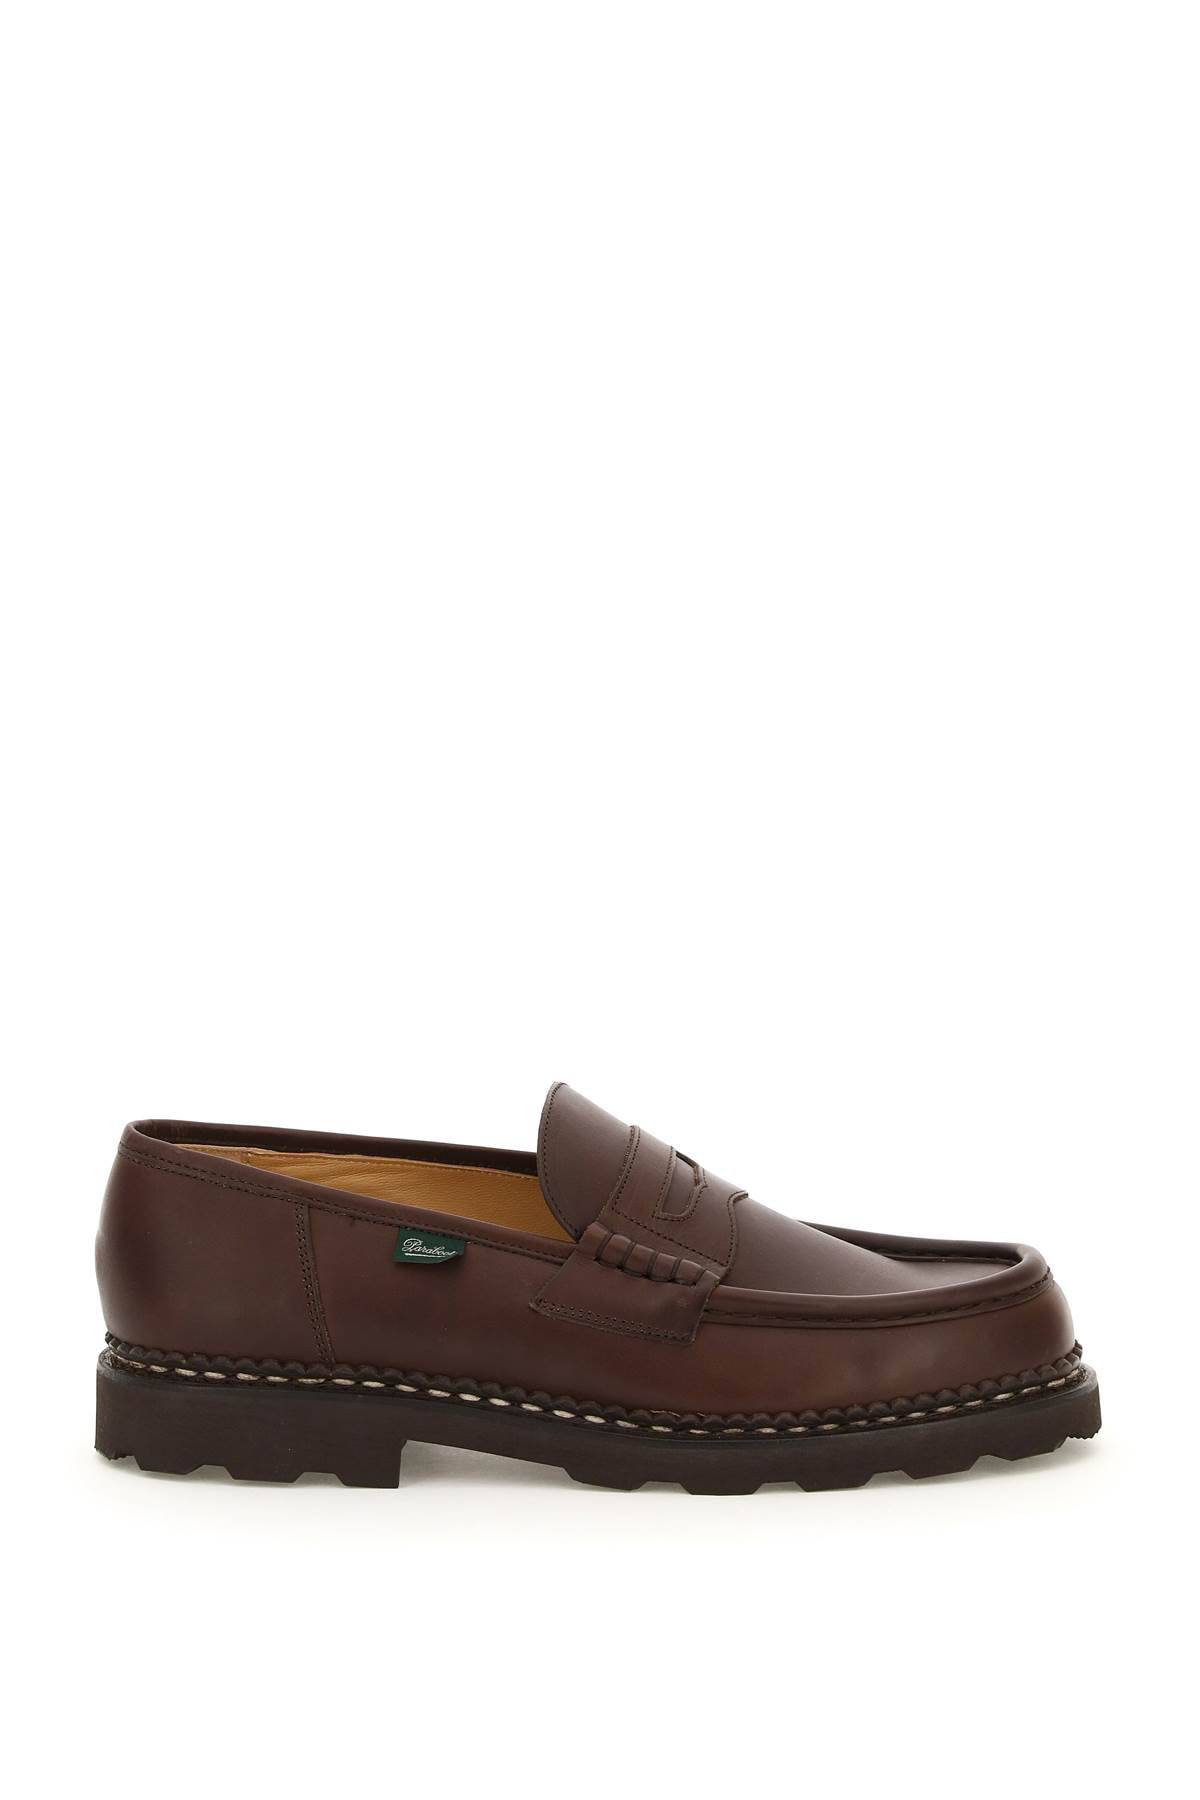 Paraboot leather reims penny loafers - Walmart.com